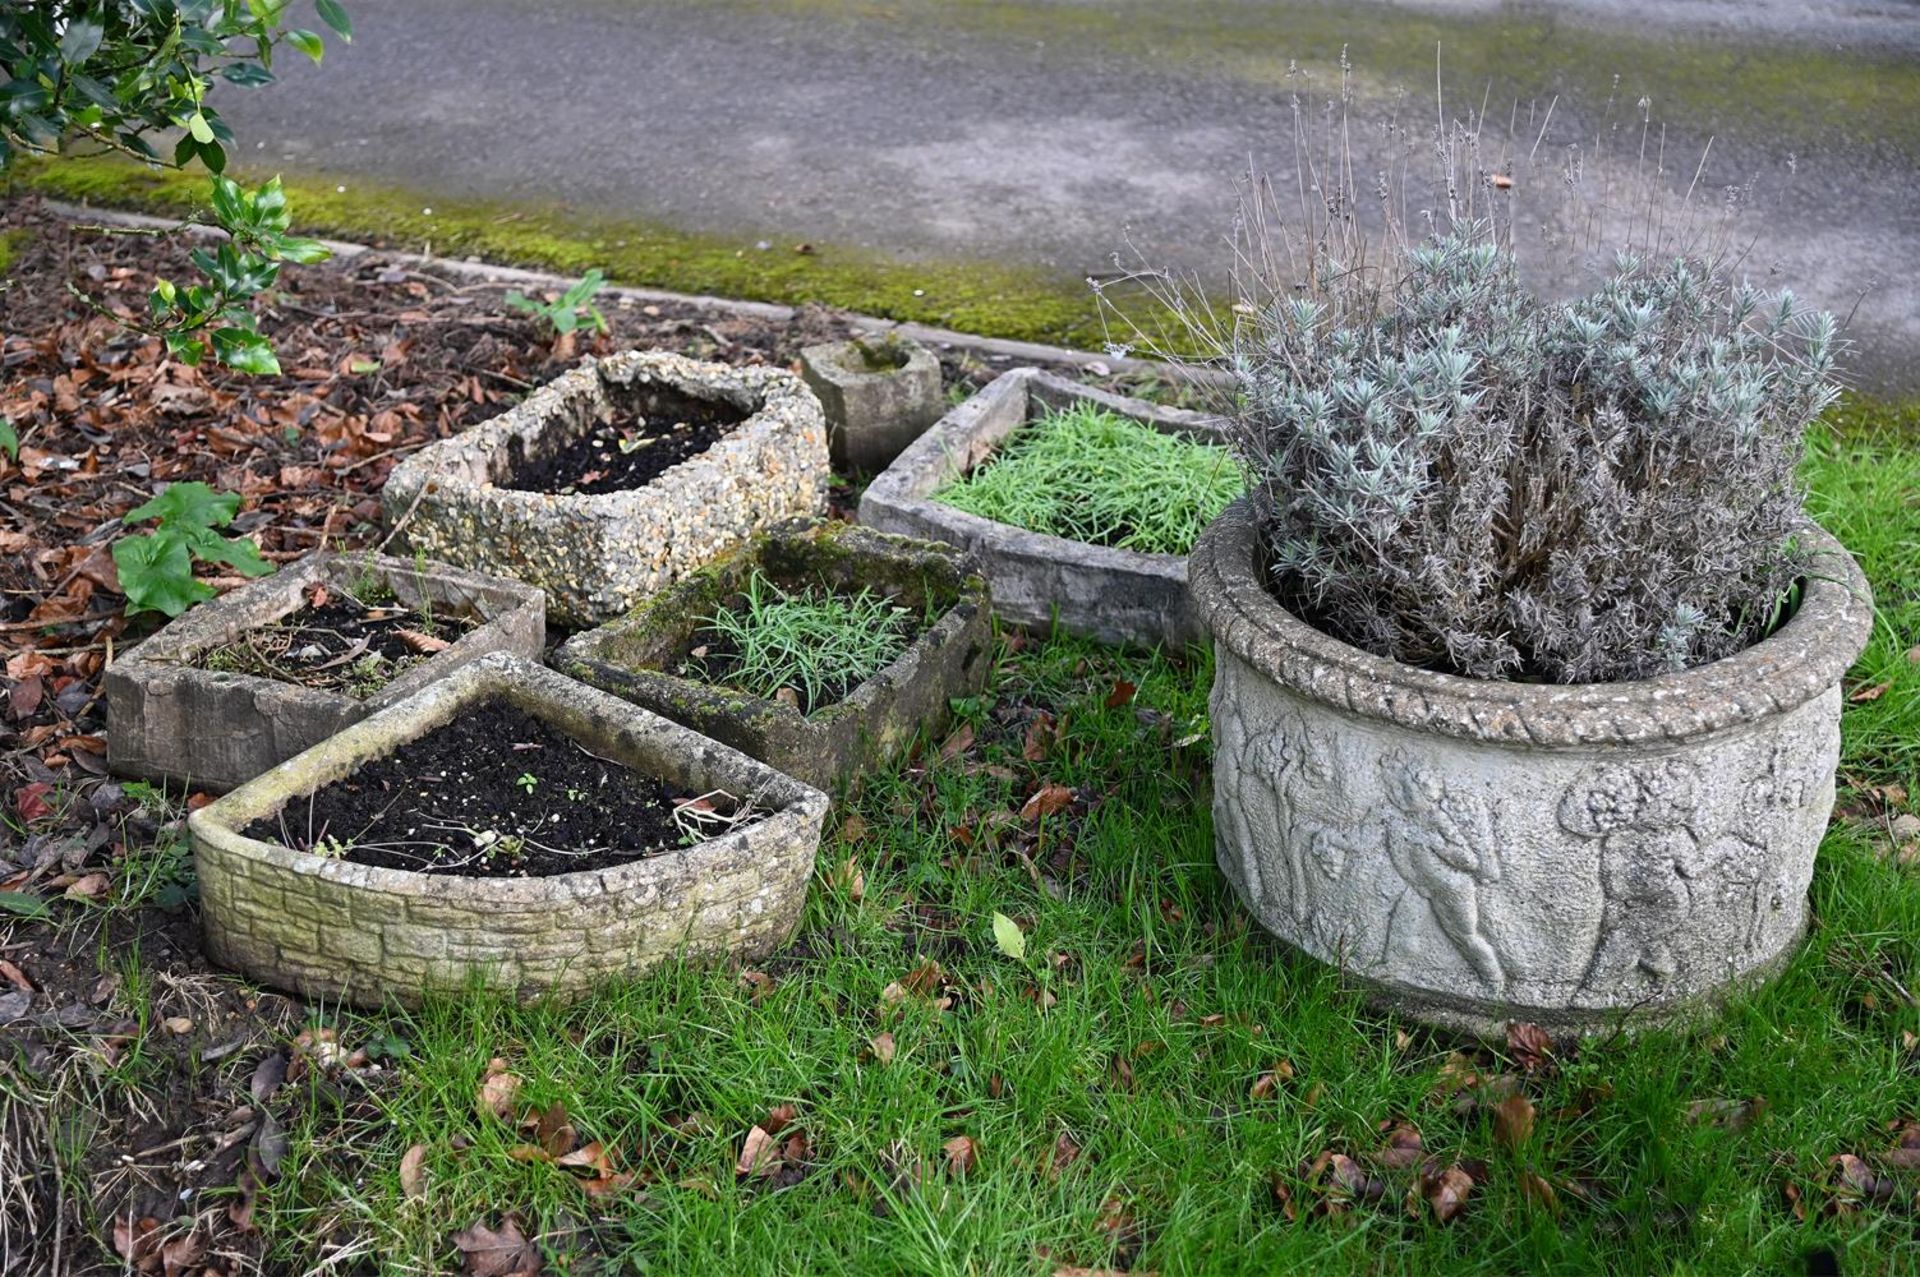 A GROUP OF VARIOUS STONE COMPOSITION GARDEN PLANTERS